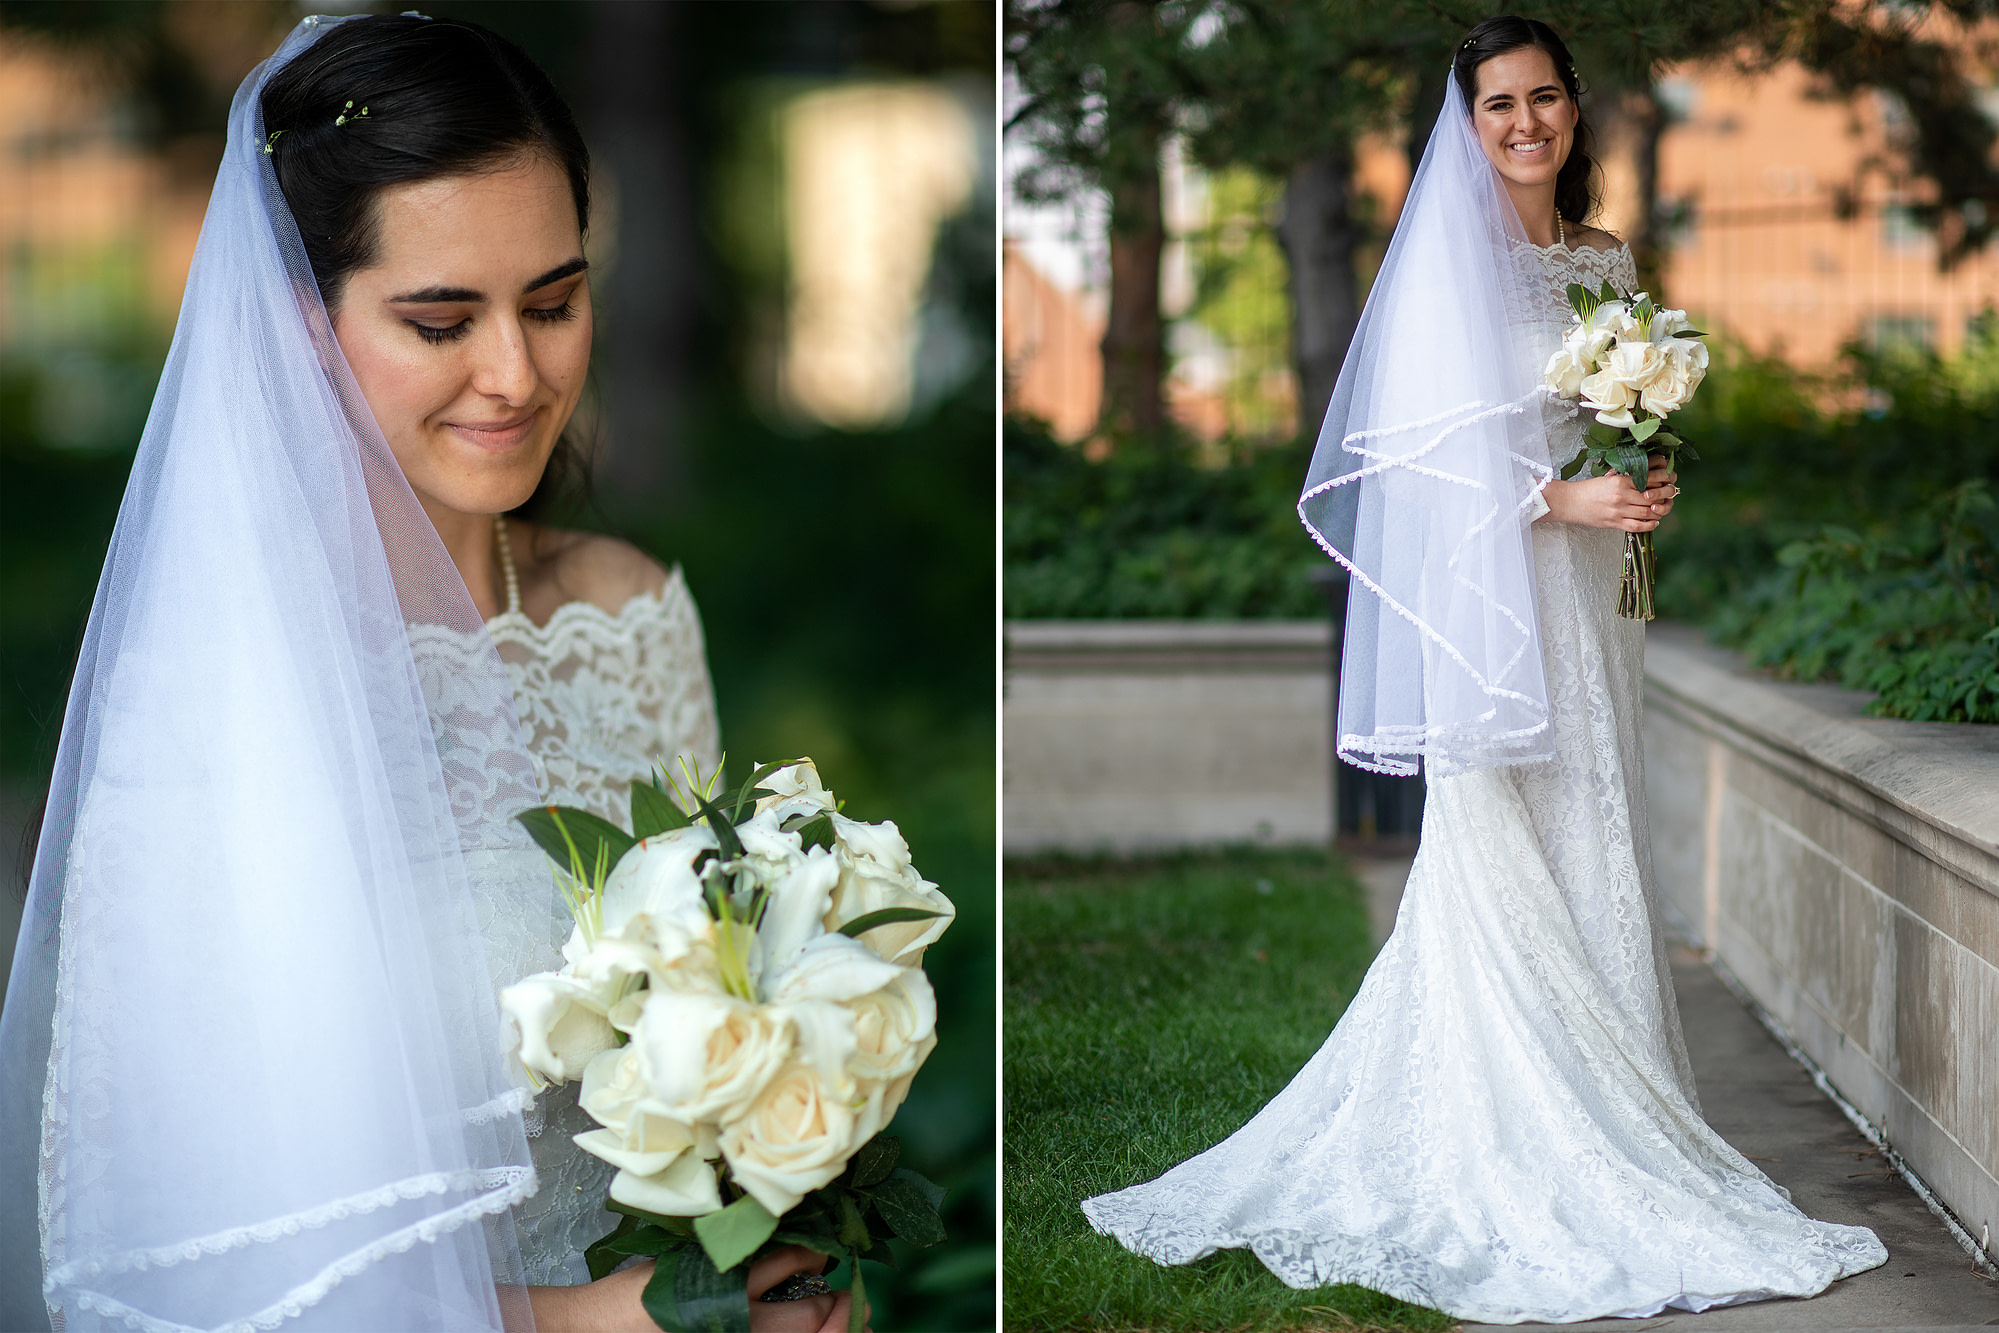 Aurora poses for a portrait after her wedding outside the Cathedral Basilica of the Immaculate Conception.